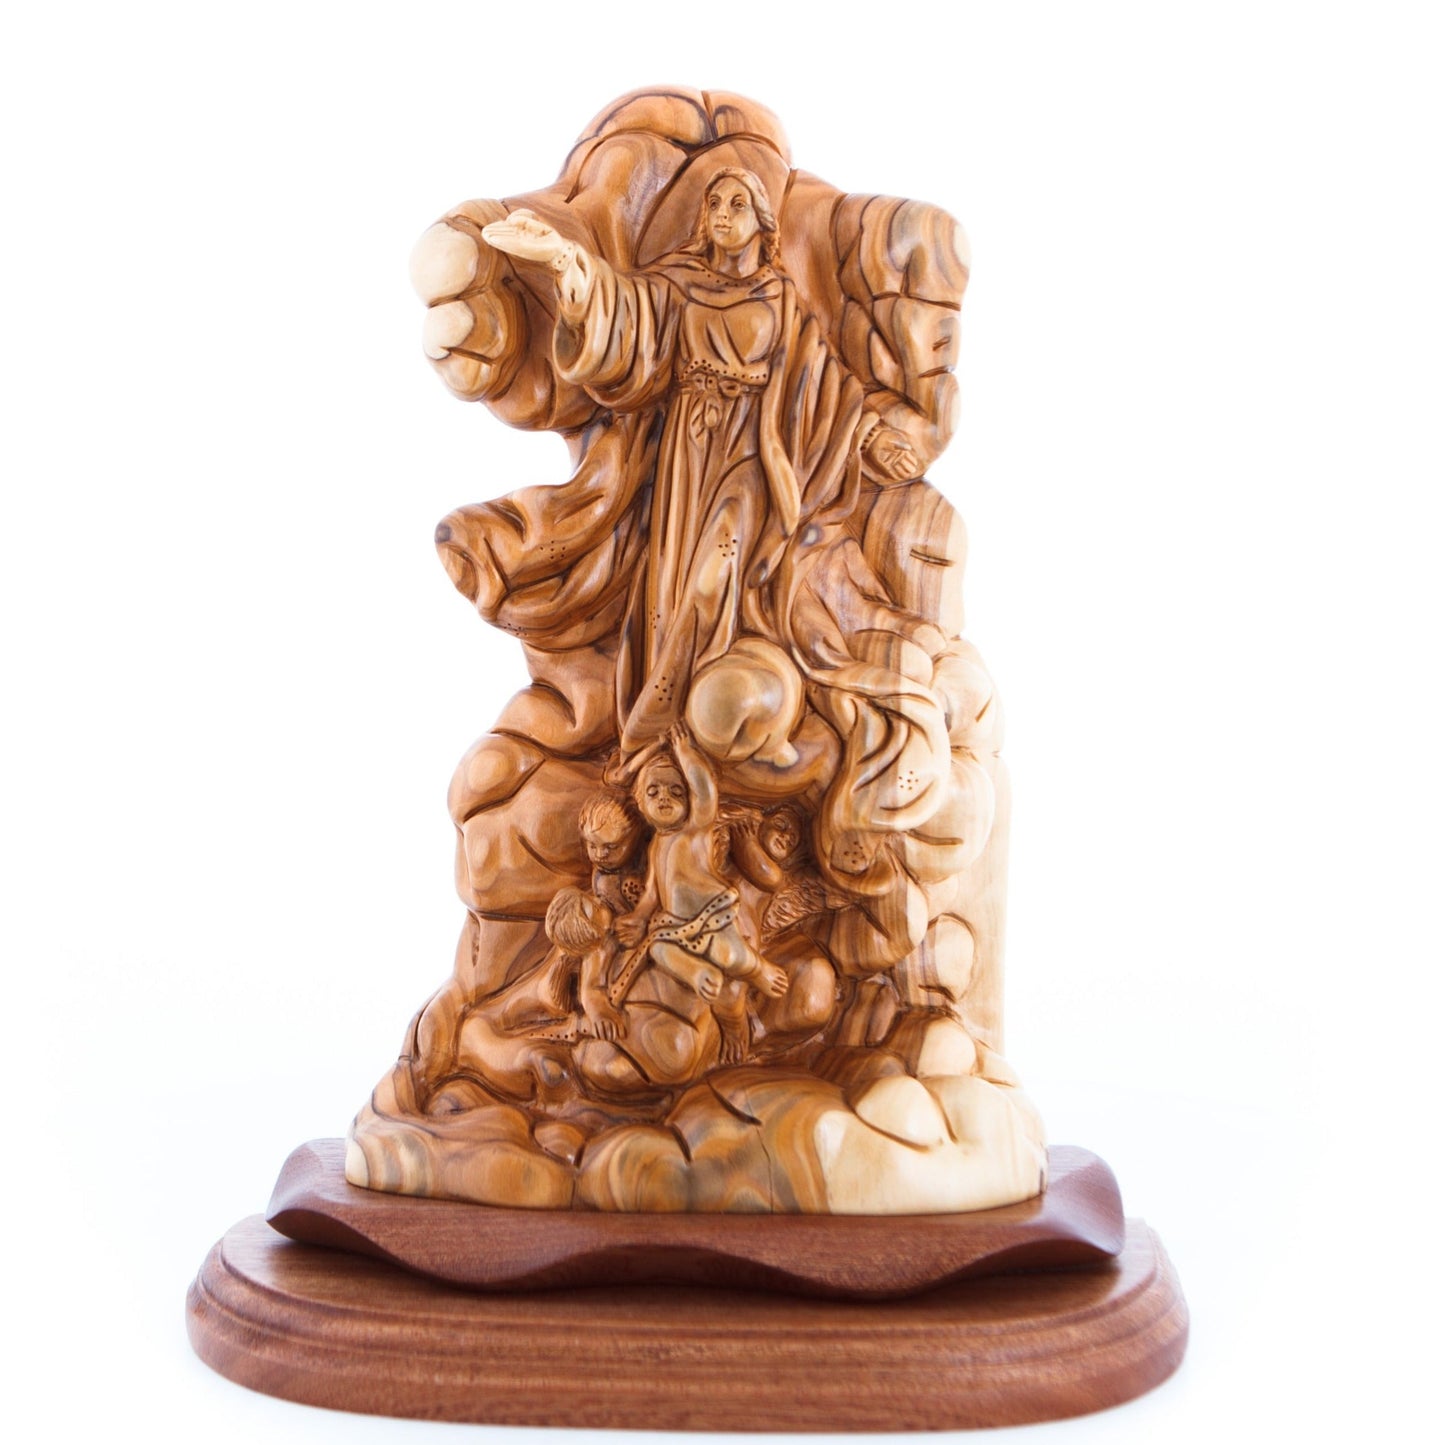 "Assumption of Mary into Heaven", 10.4" Olive Wood Carving from the Holy Land